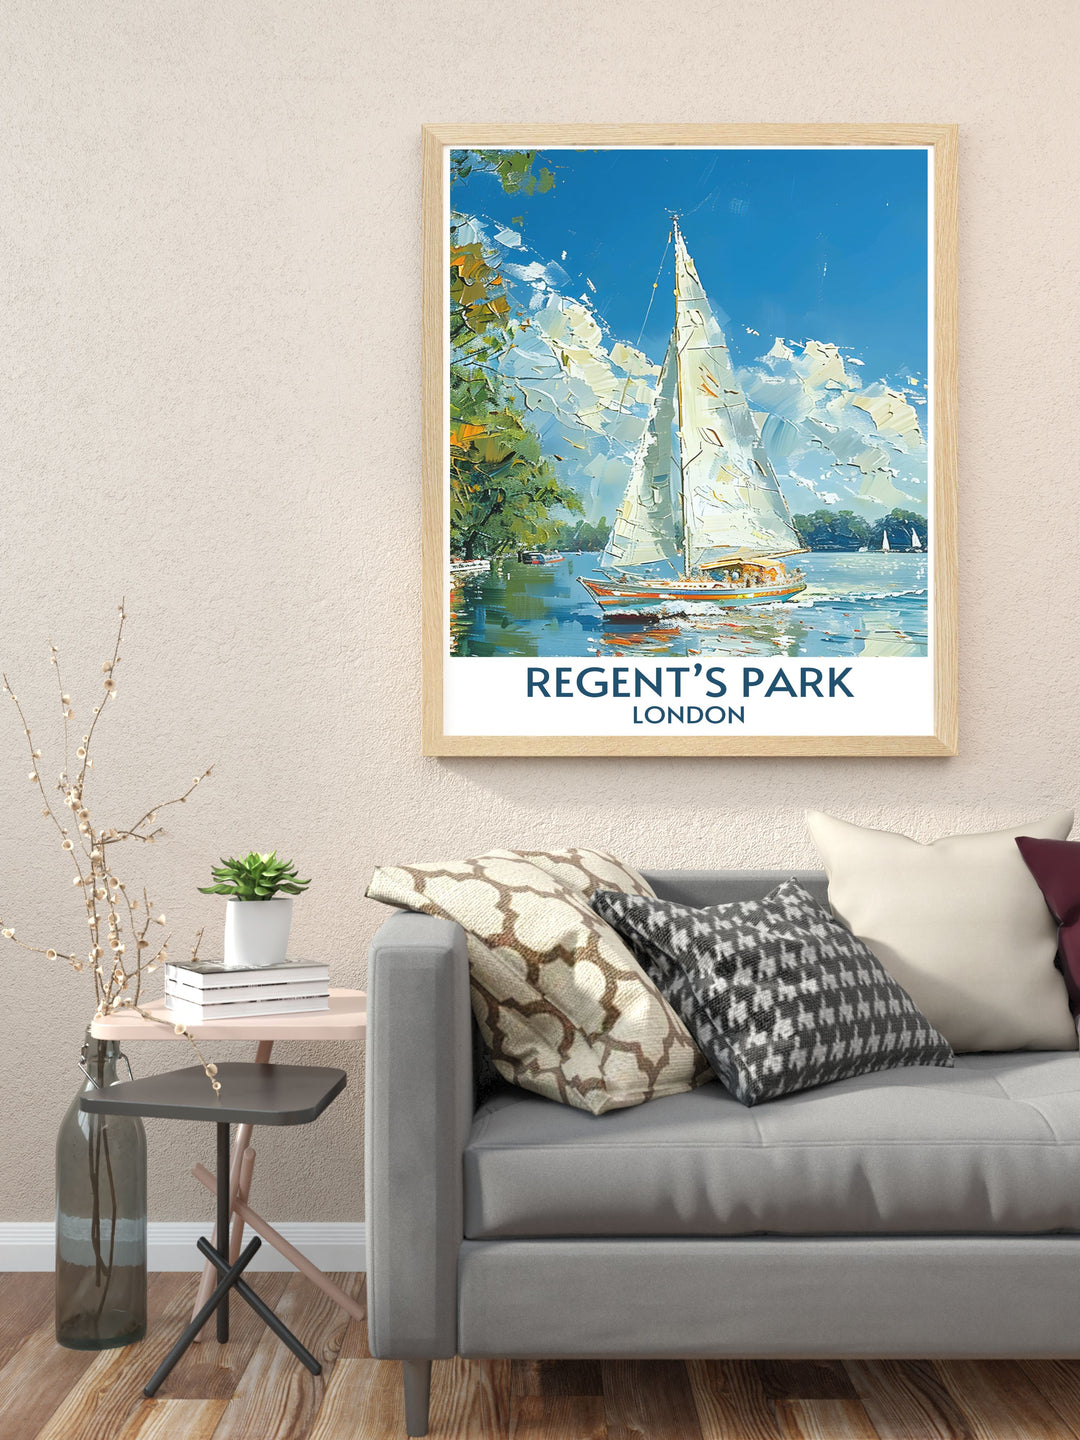 Boating Lake Wall Art celebrating the serene waters and scenic views of this iconic location in Regents Park, perfect for any decor.